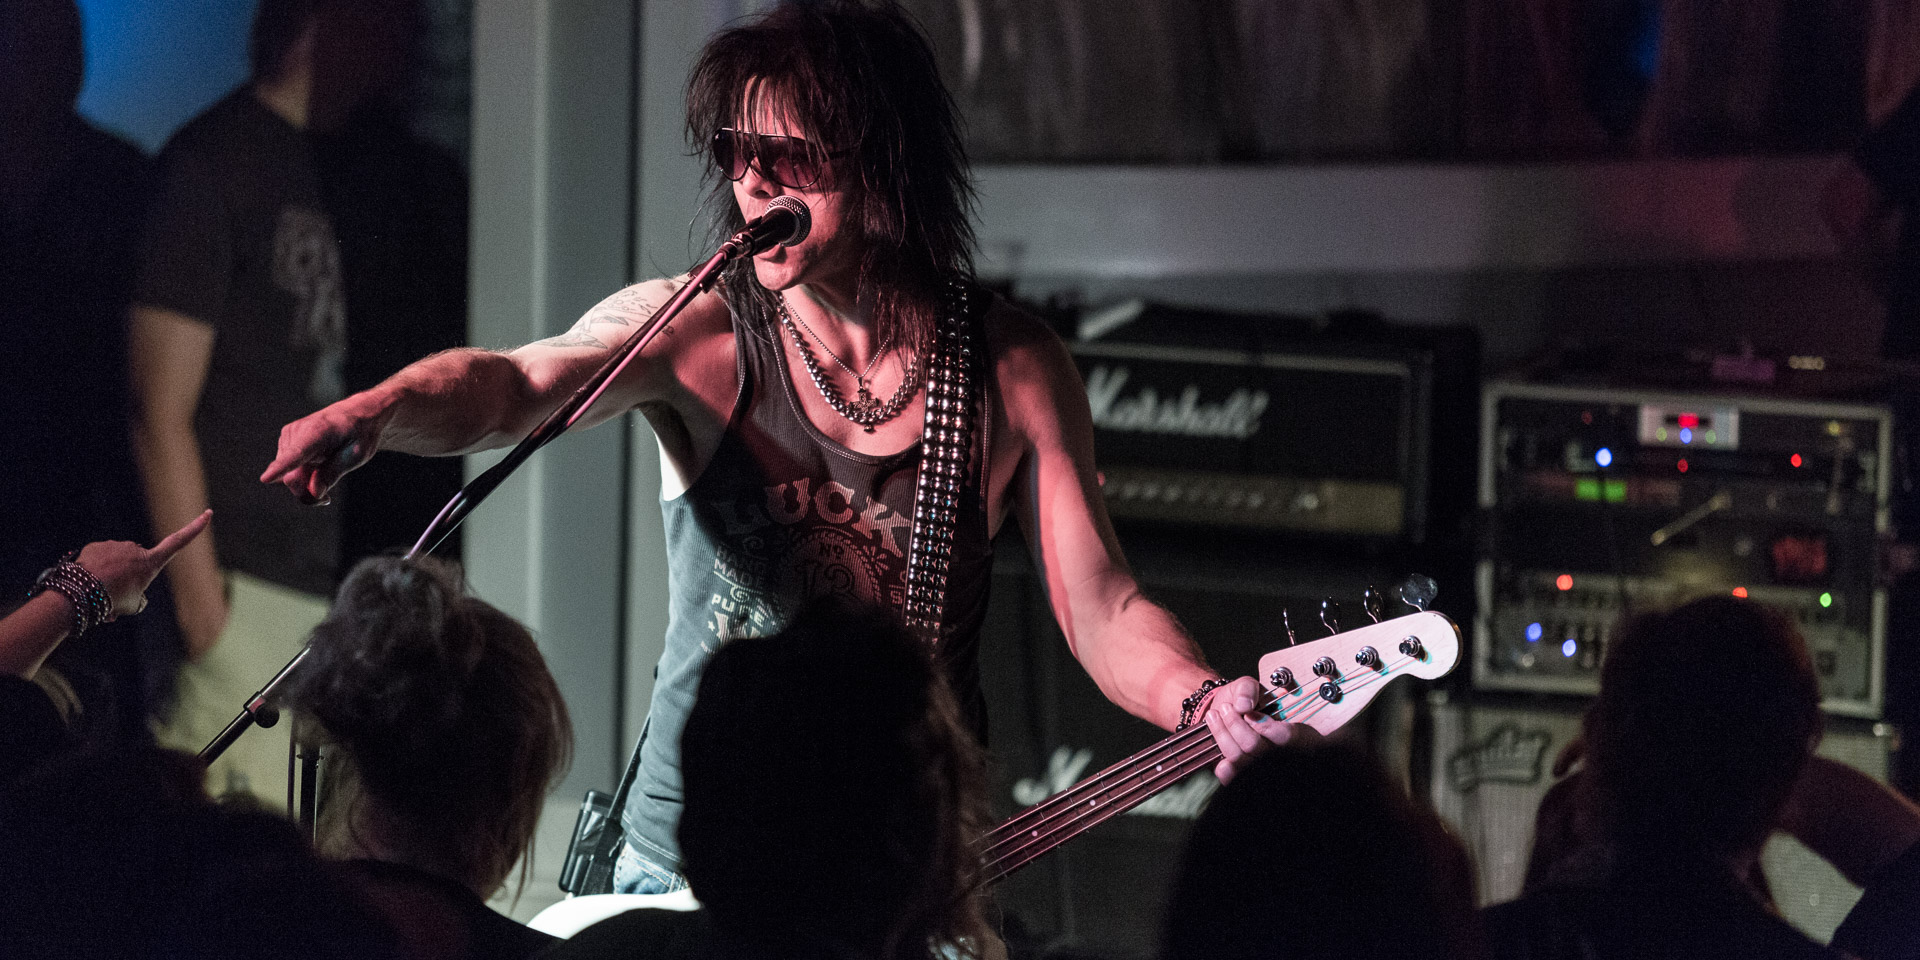 L.A. Guns live at Whiskey Room in Raleigh 4/19/2013.